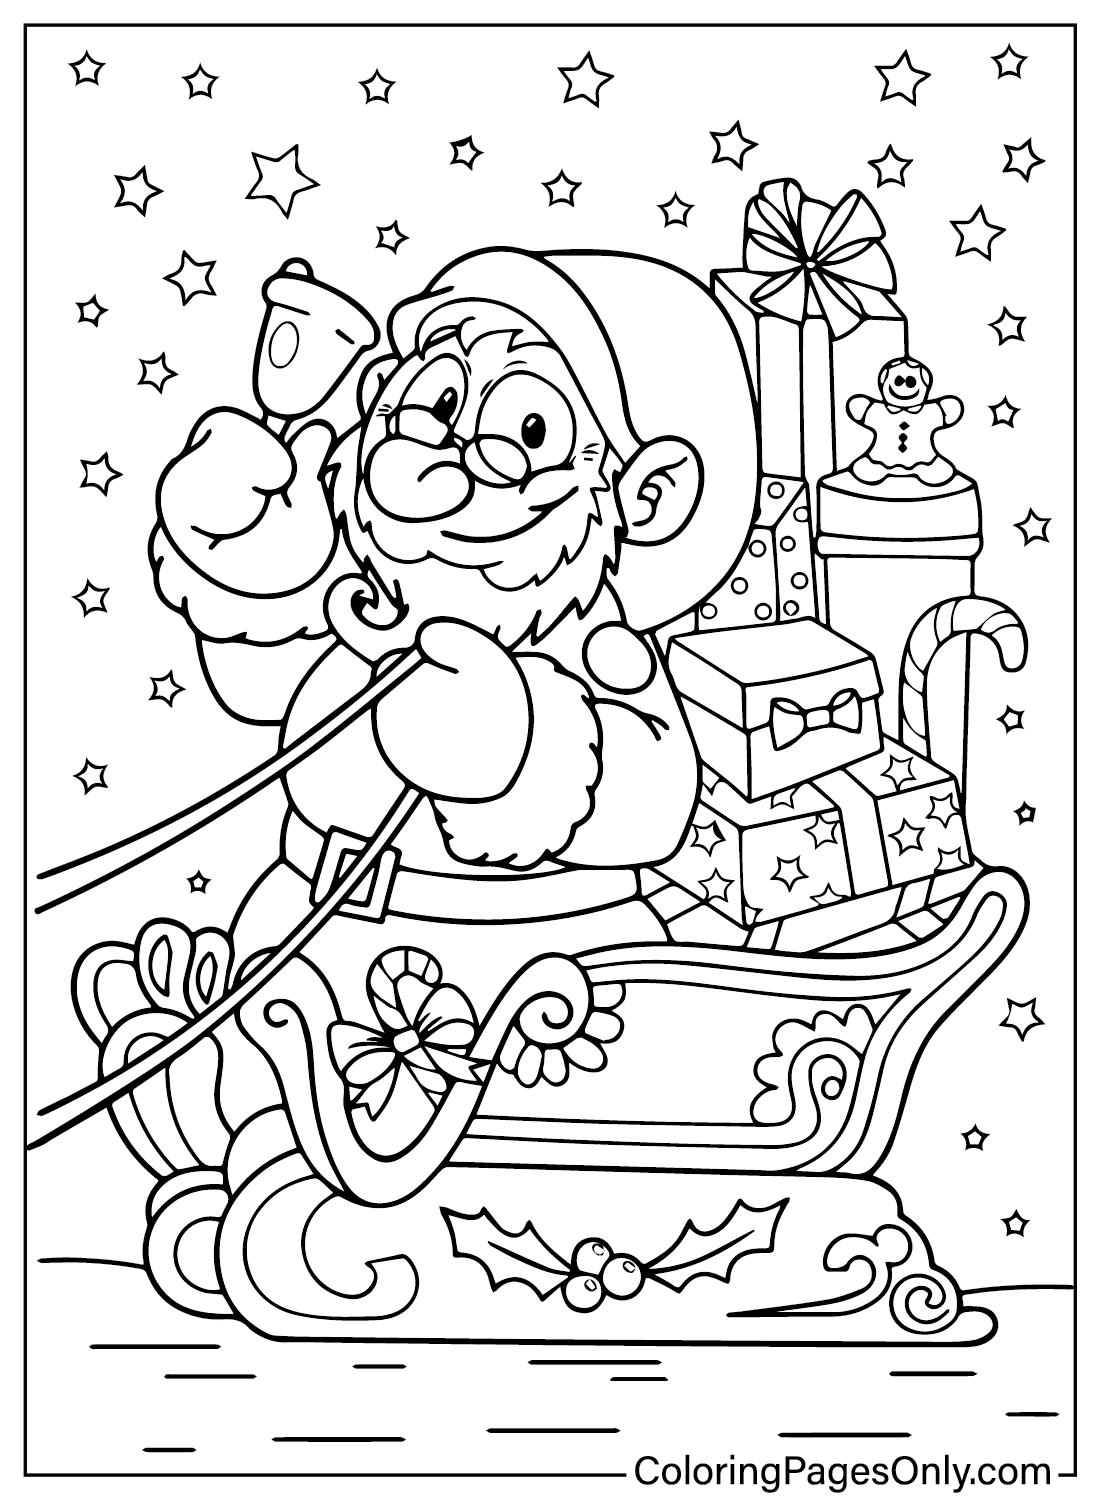 Santa Claus Coloring Pages for Adults from Santa Claus